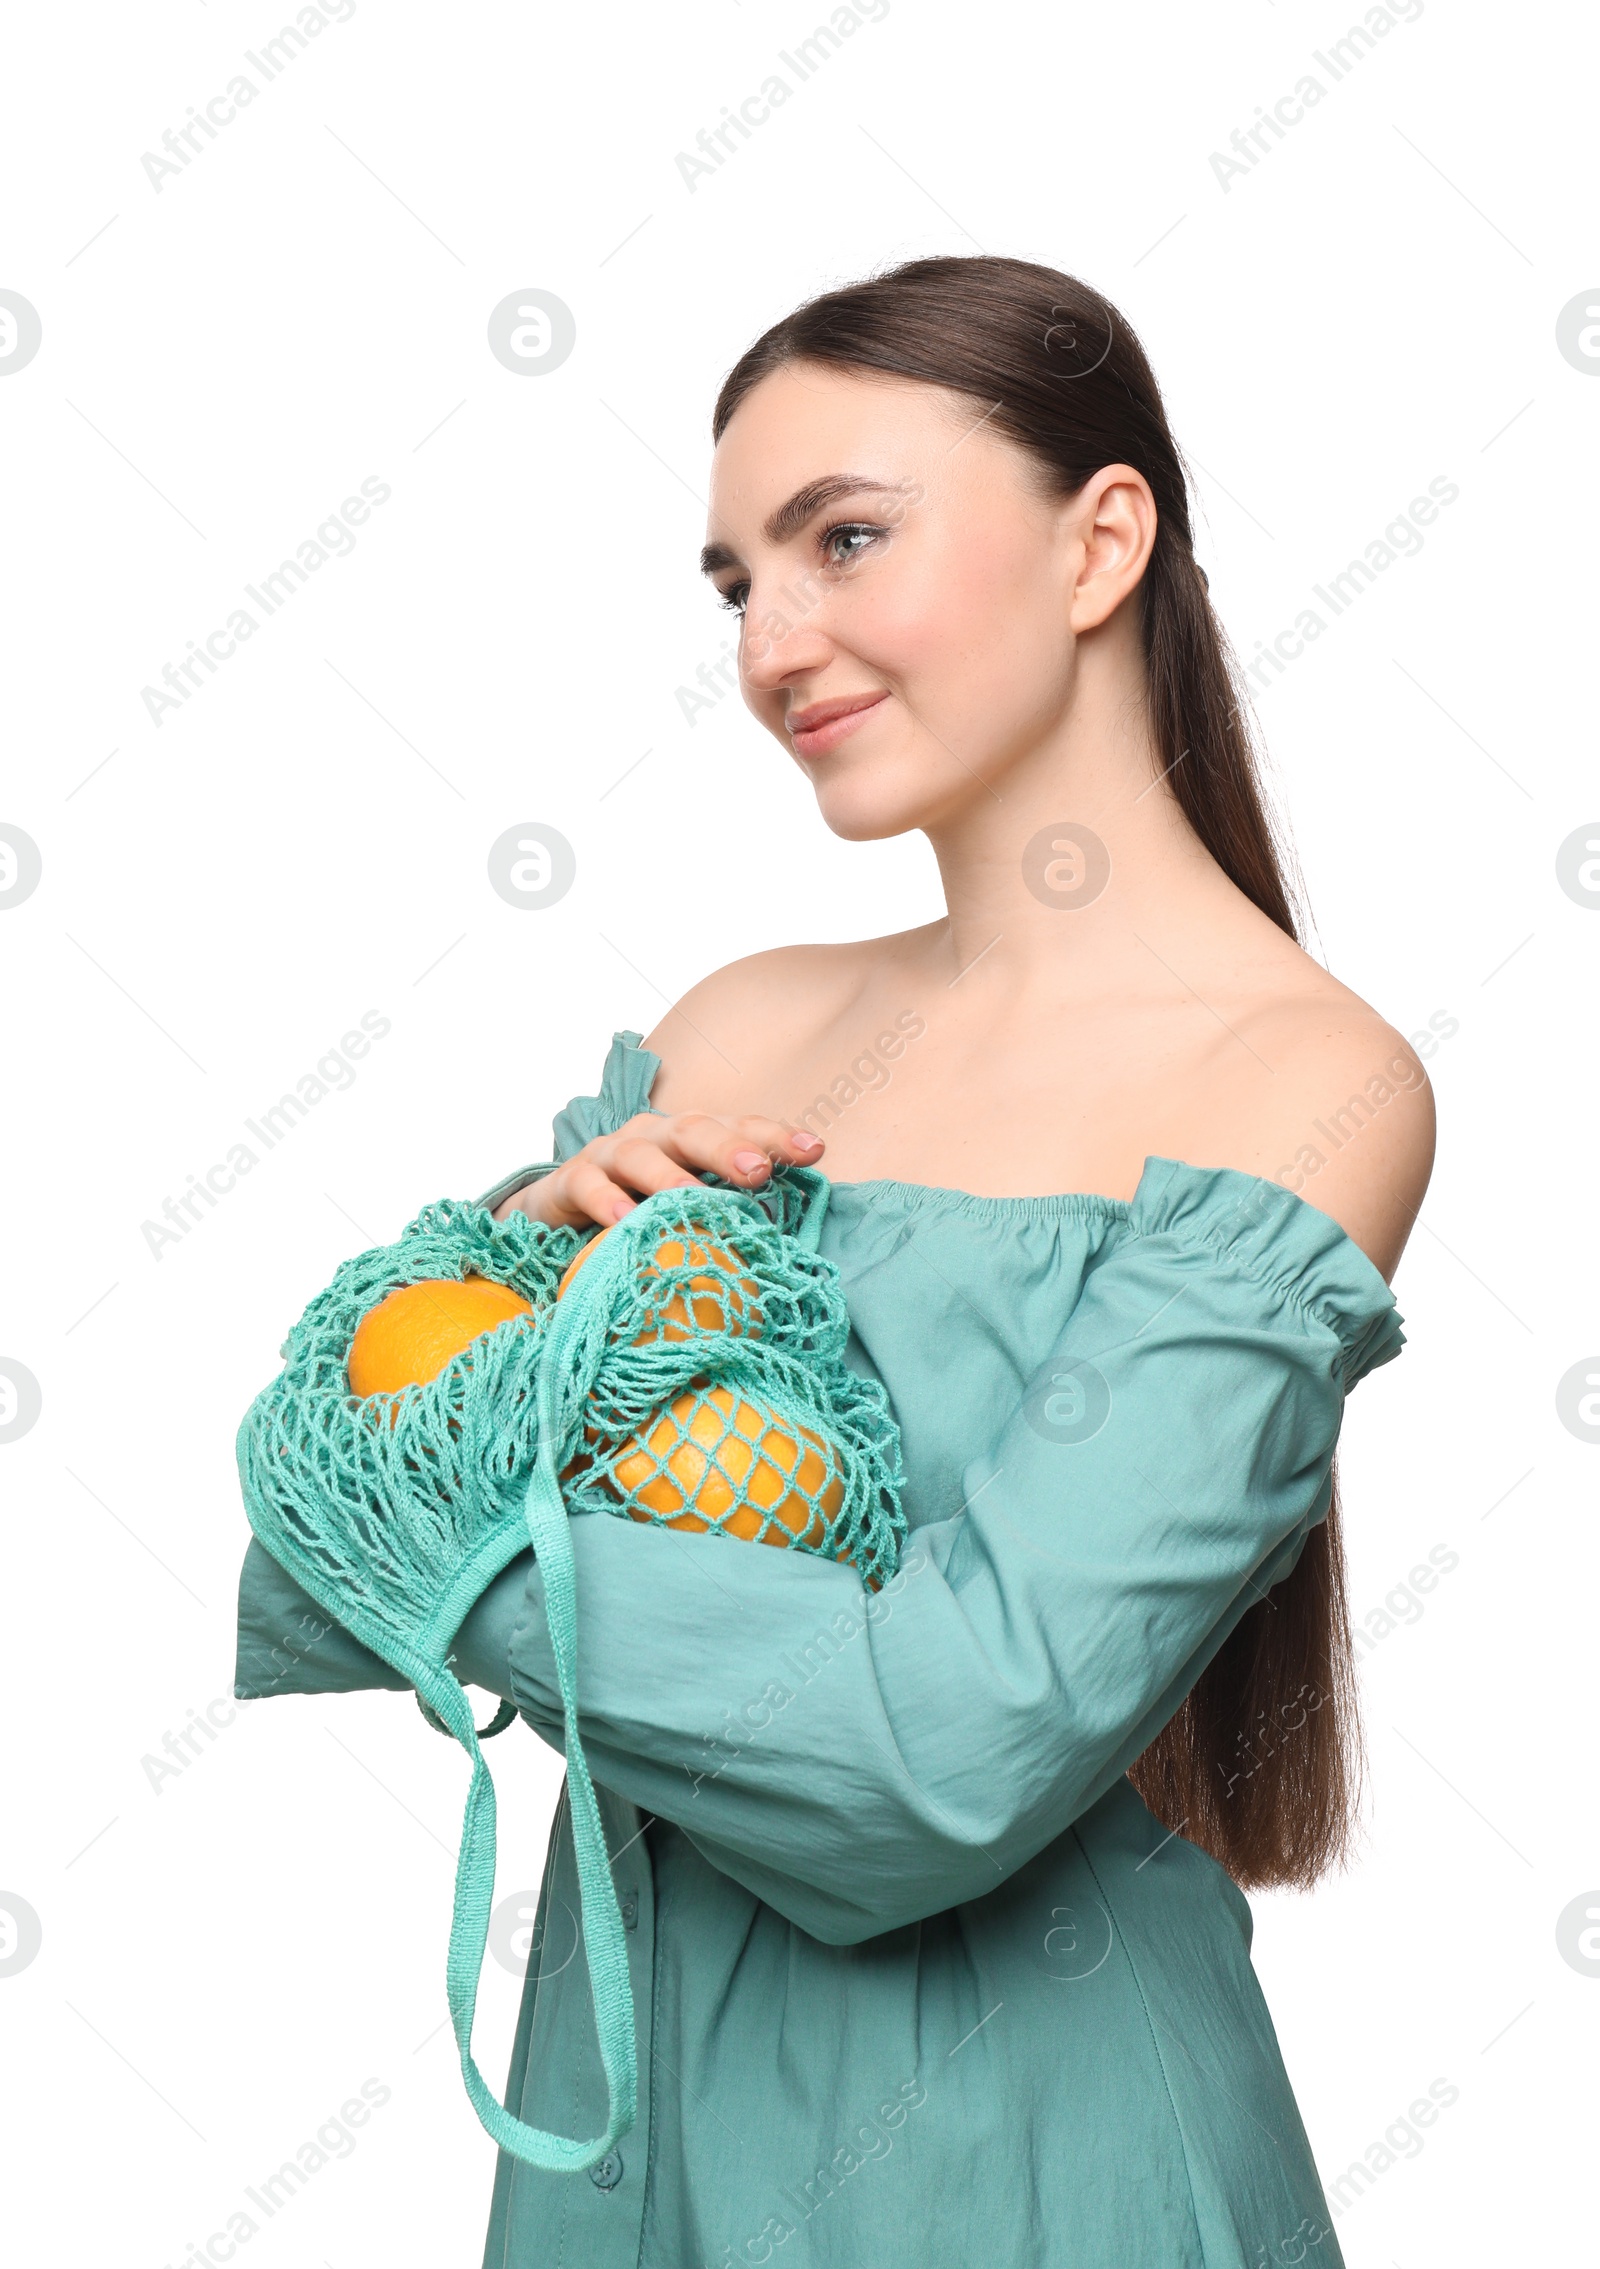 Photo of Woman with string bag of fresh lemons on white background